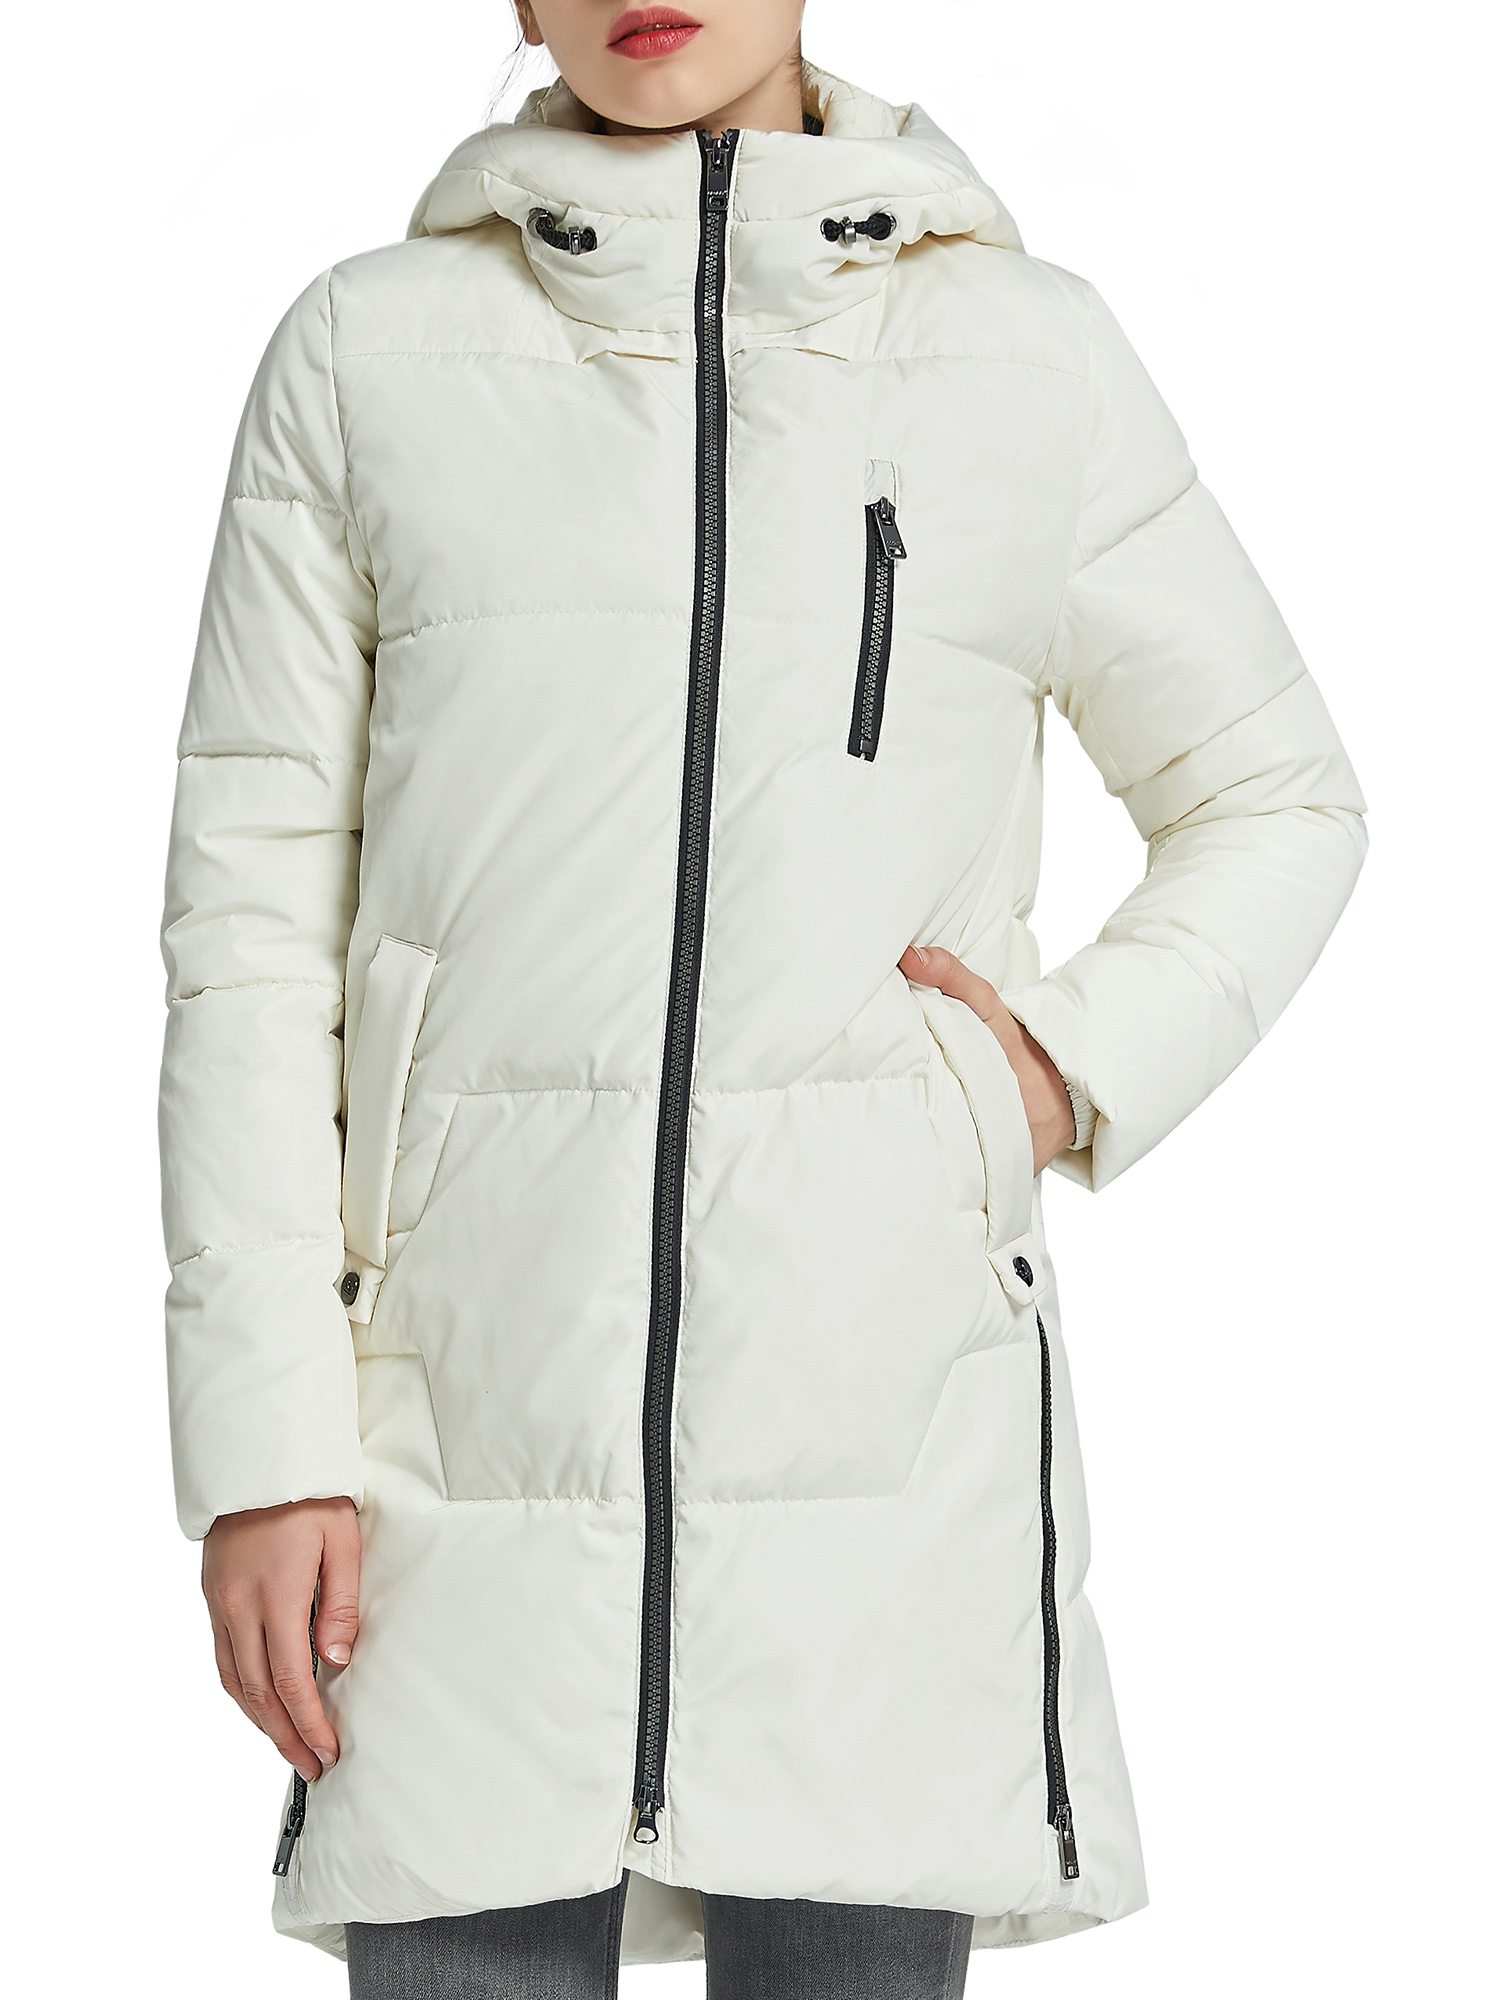 Orolay Women's Quilted Down Jacket Winter Down Coat Parka Coat with Hood Mid Lrngth Down Parka White XS - image 1 of 5